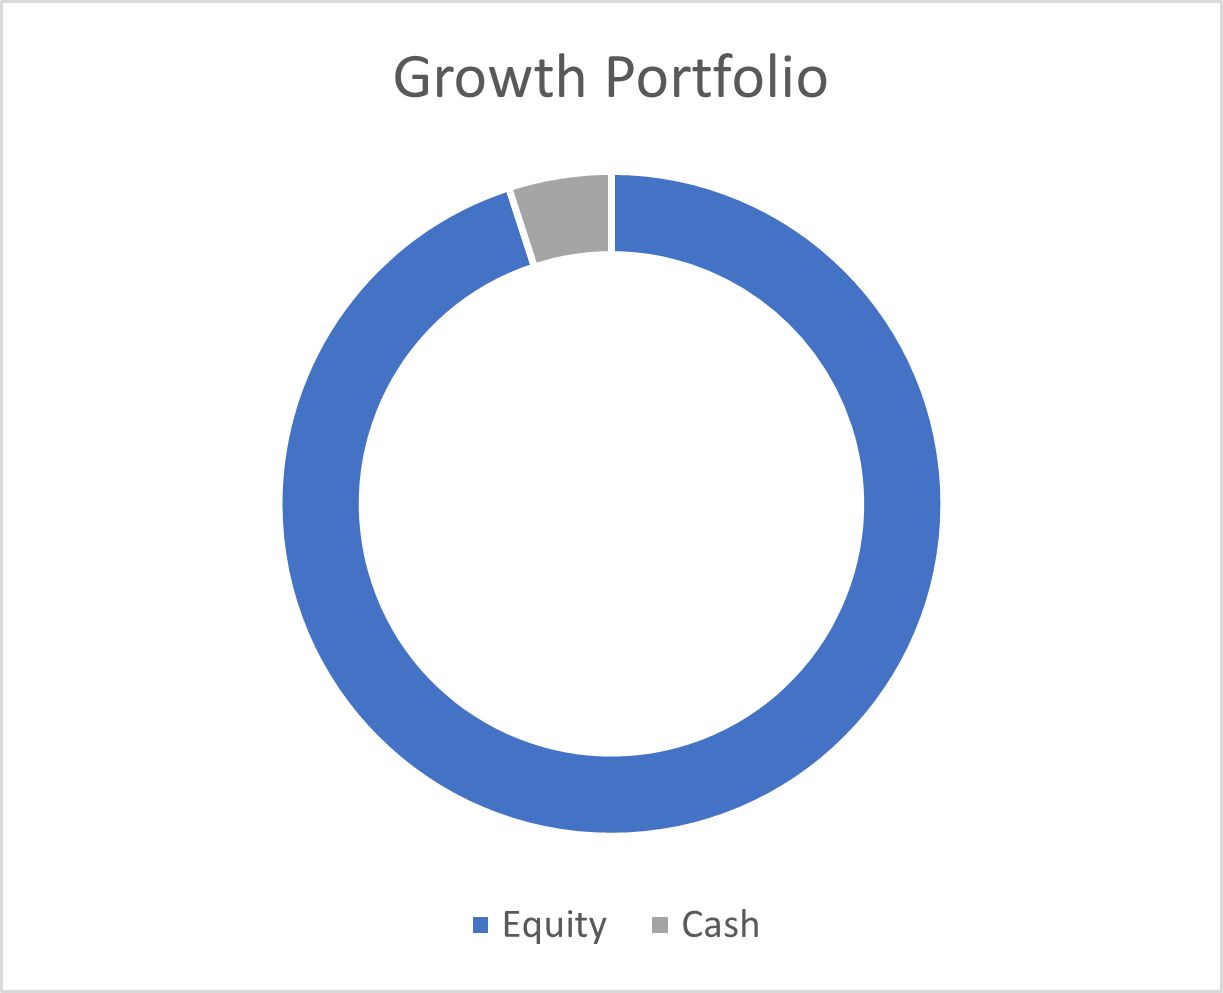 The graph of a growth portfolio with 95% equity and 5% cash